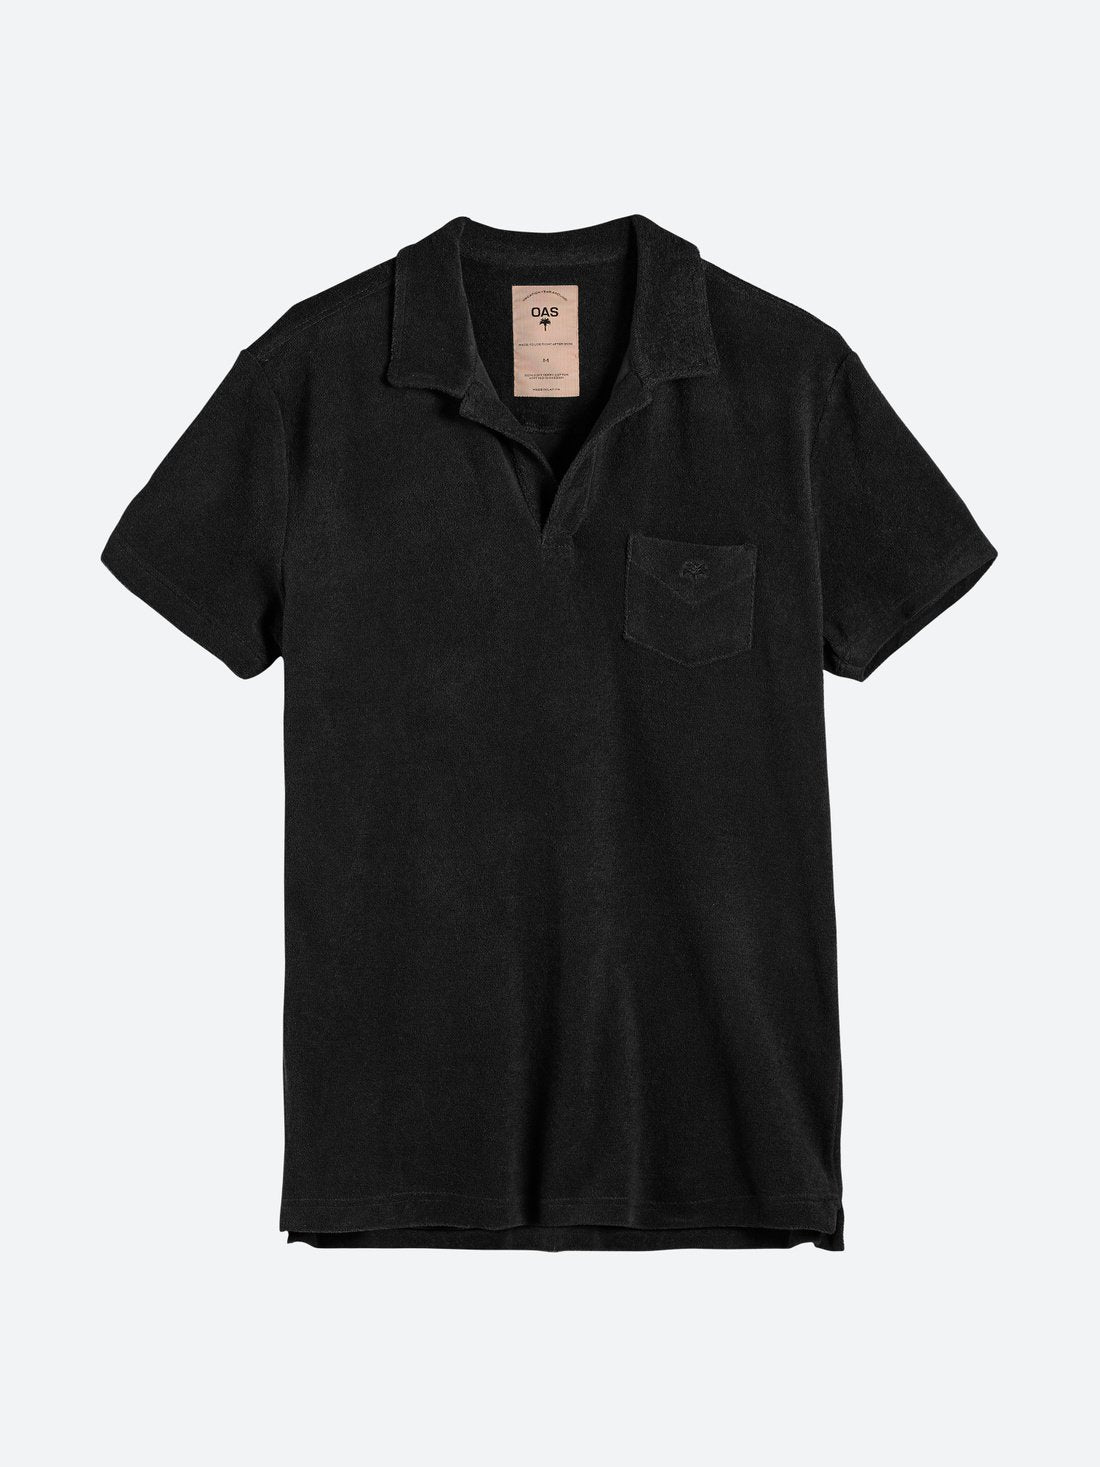 Oas Solid Black Terry Shirt - Mojo Independent Store